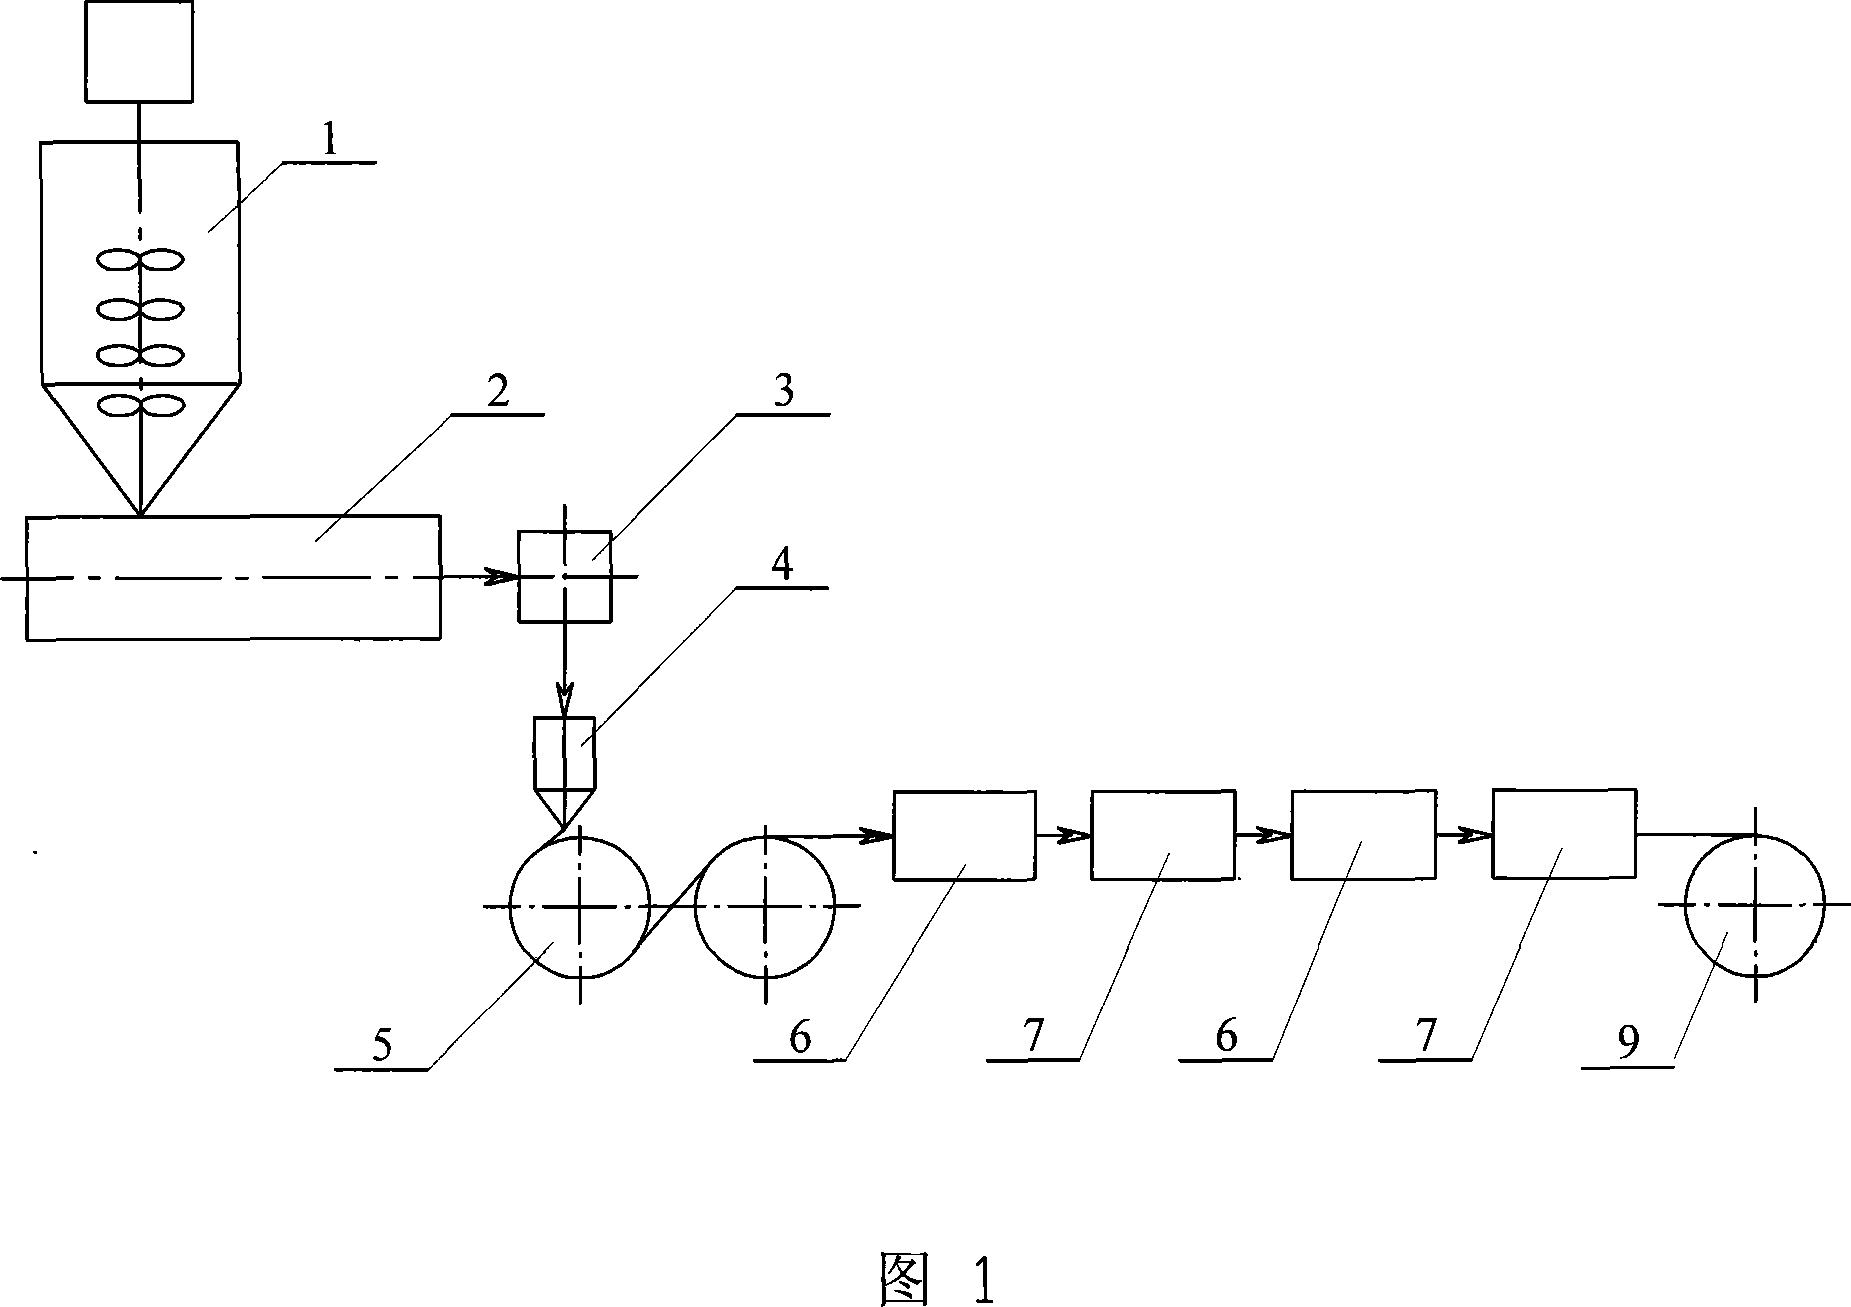 Continuous polyethylene dissolving process in a double screw extructor to prepare lithium ion cell diaphragm